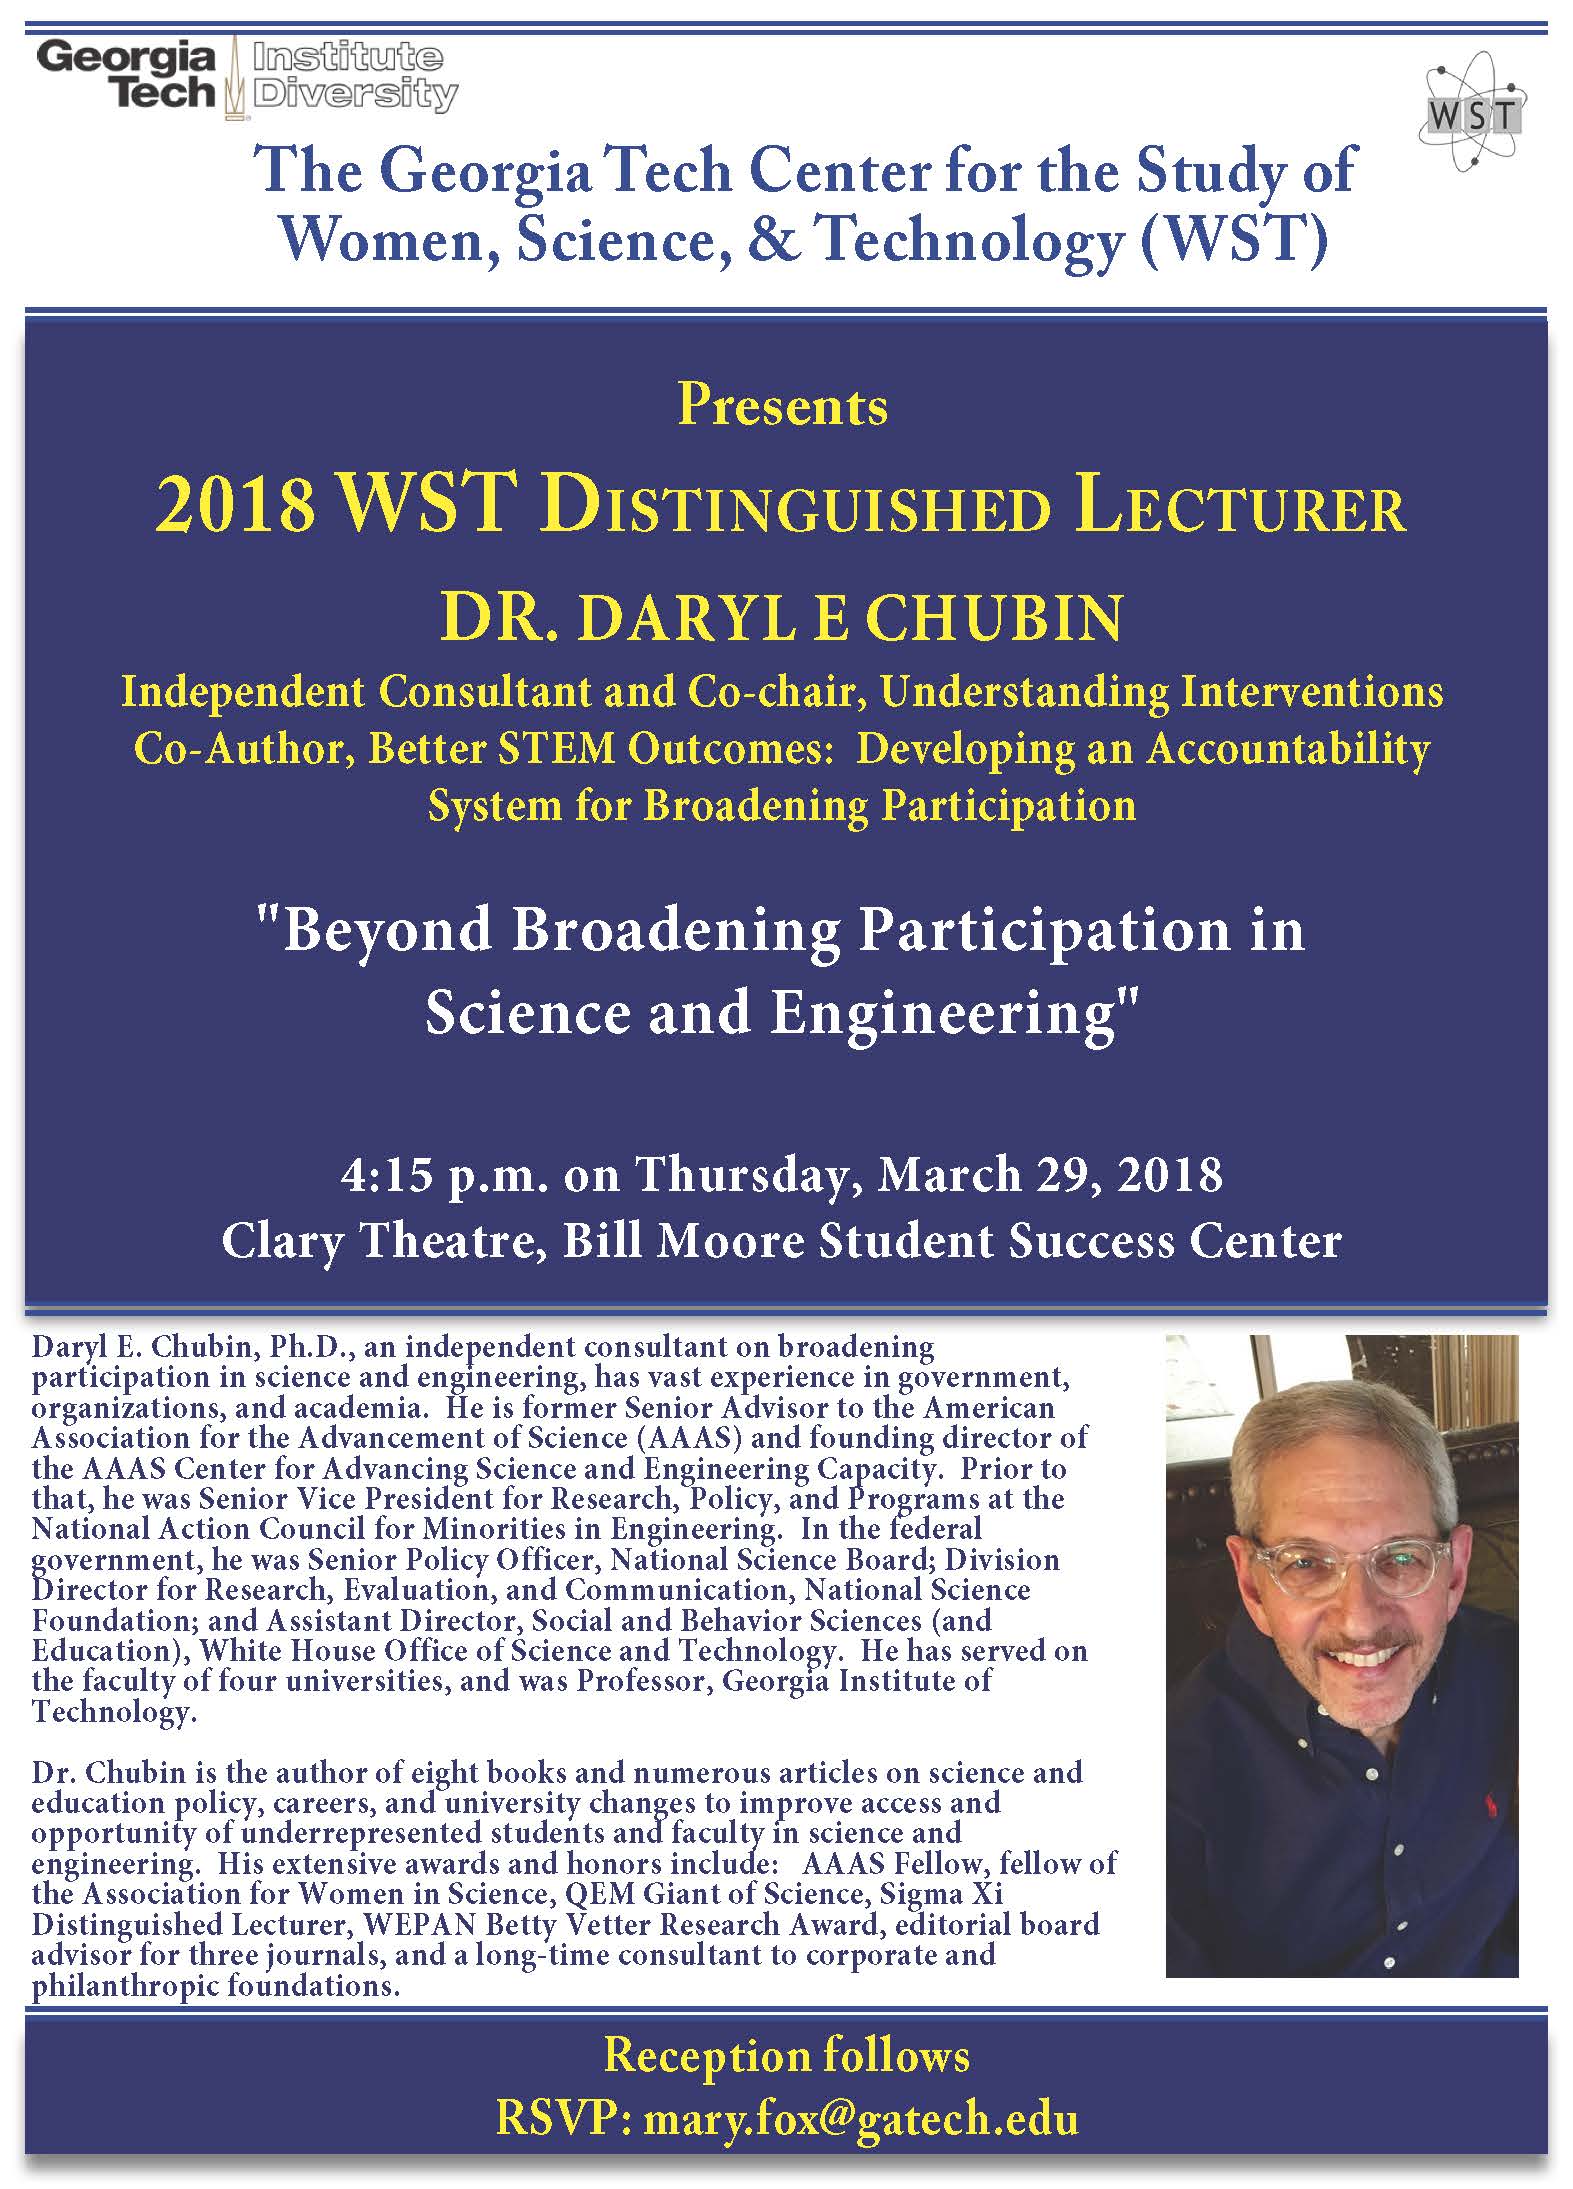 The 2018 WST Disntinguished Lecture will take place March 29th in the Clary Theater in the Bill Moore Student Success Center